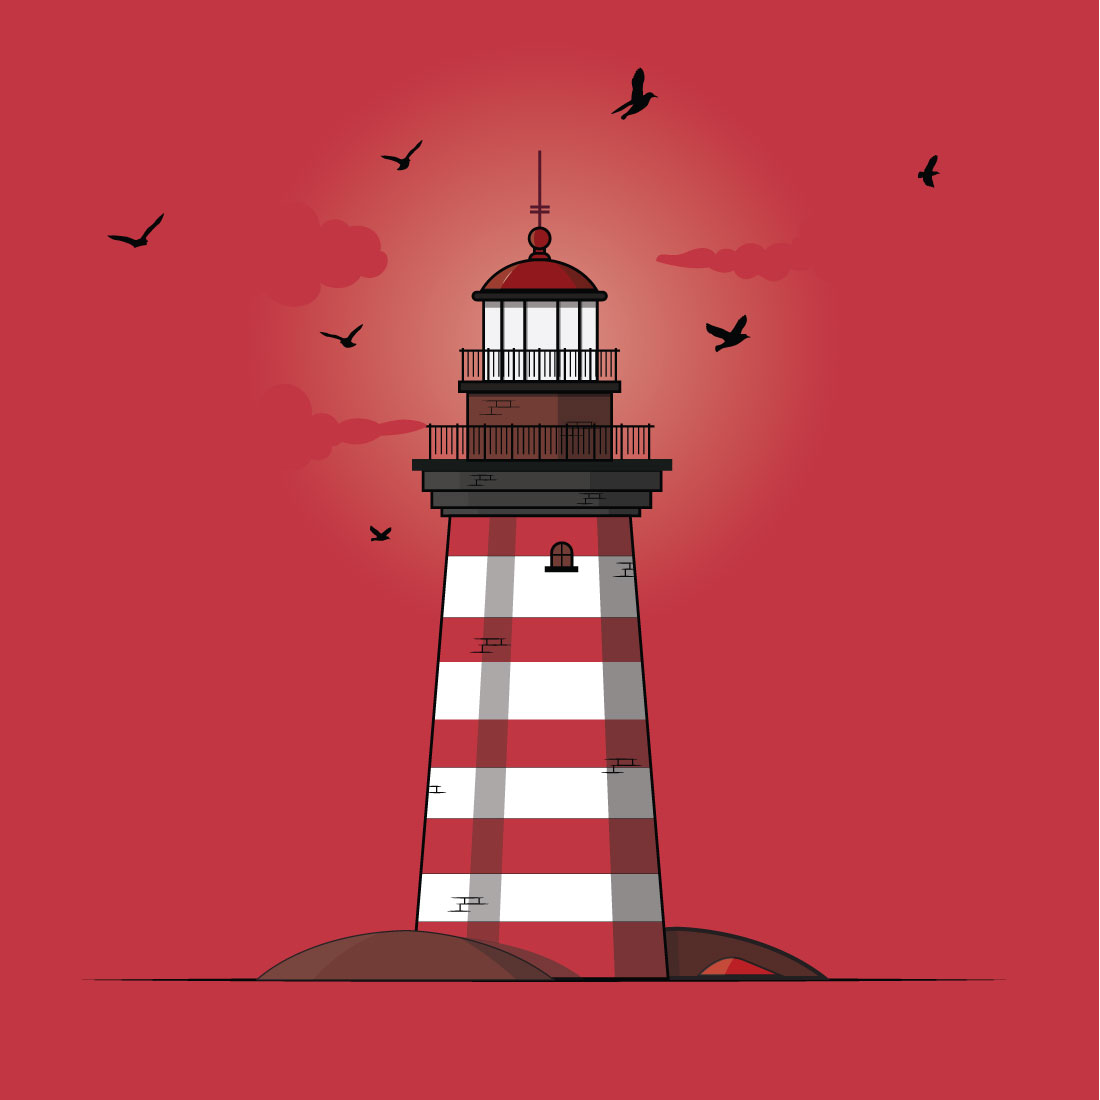 Red Light House cover image.